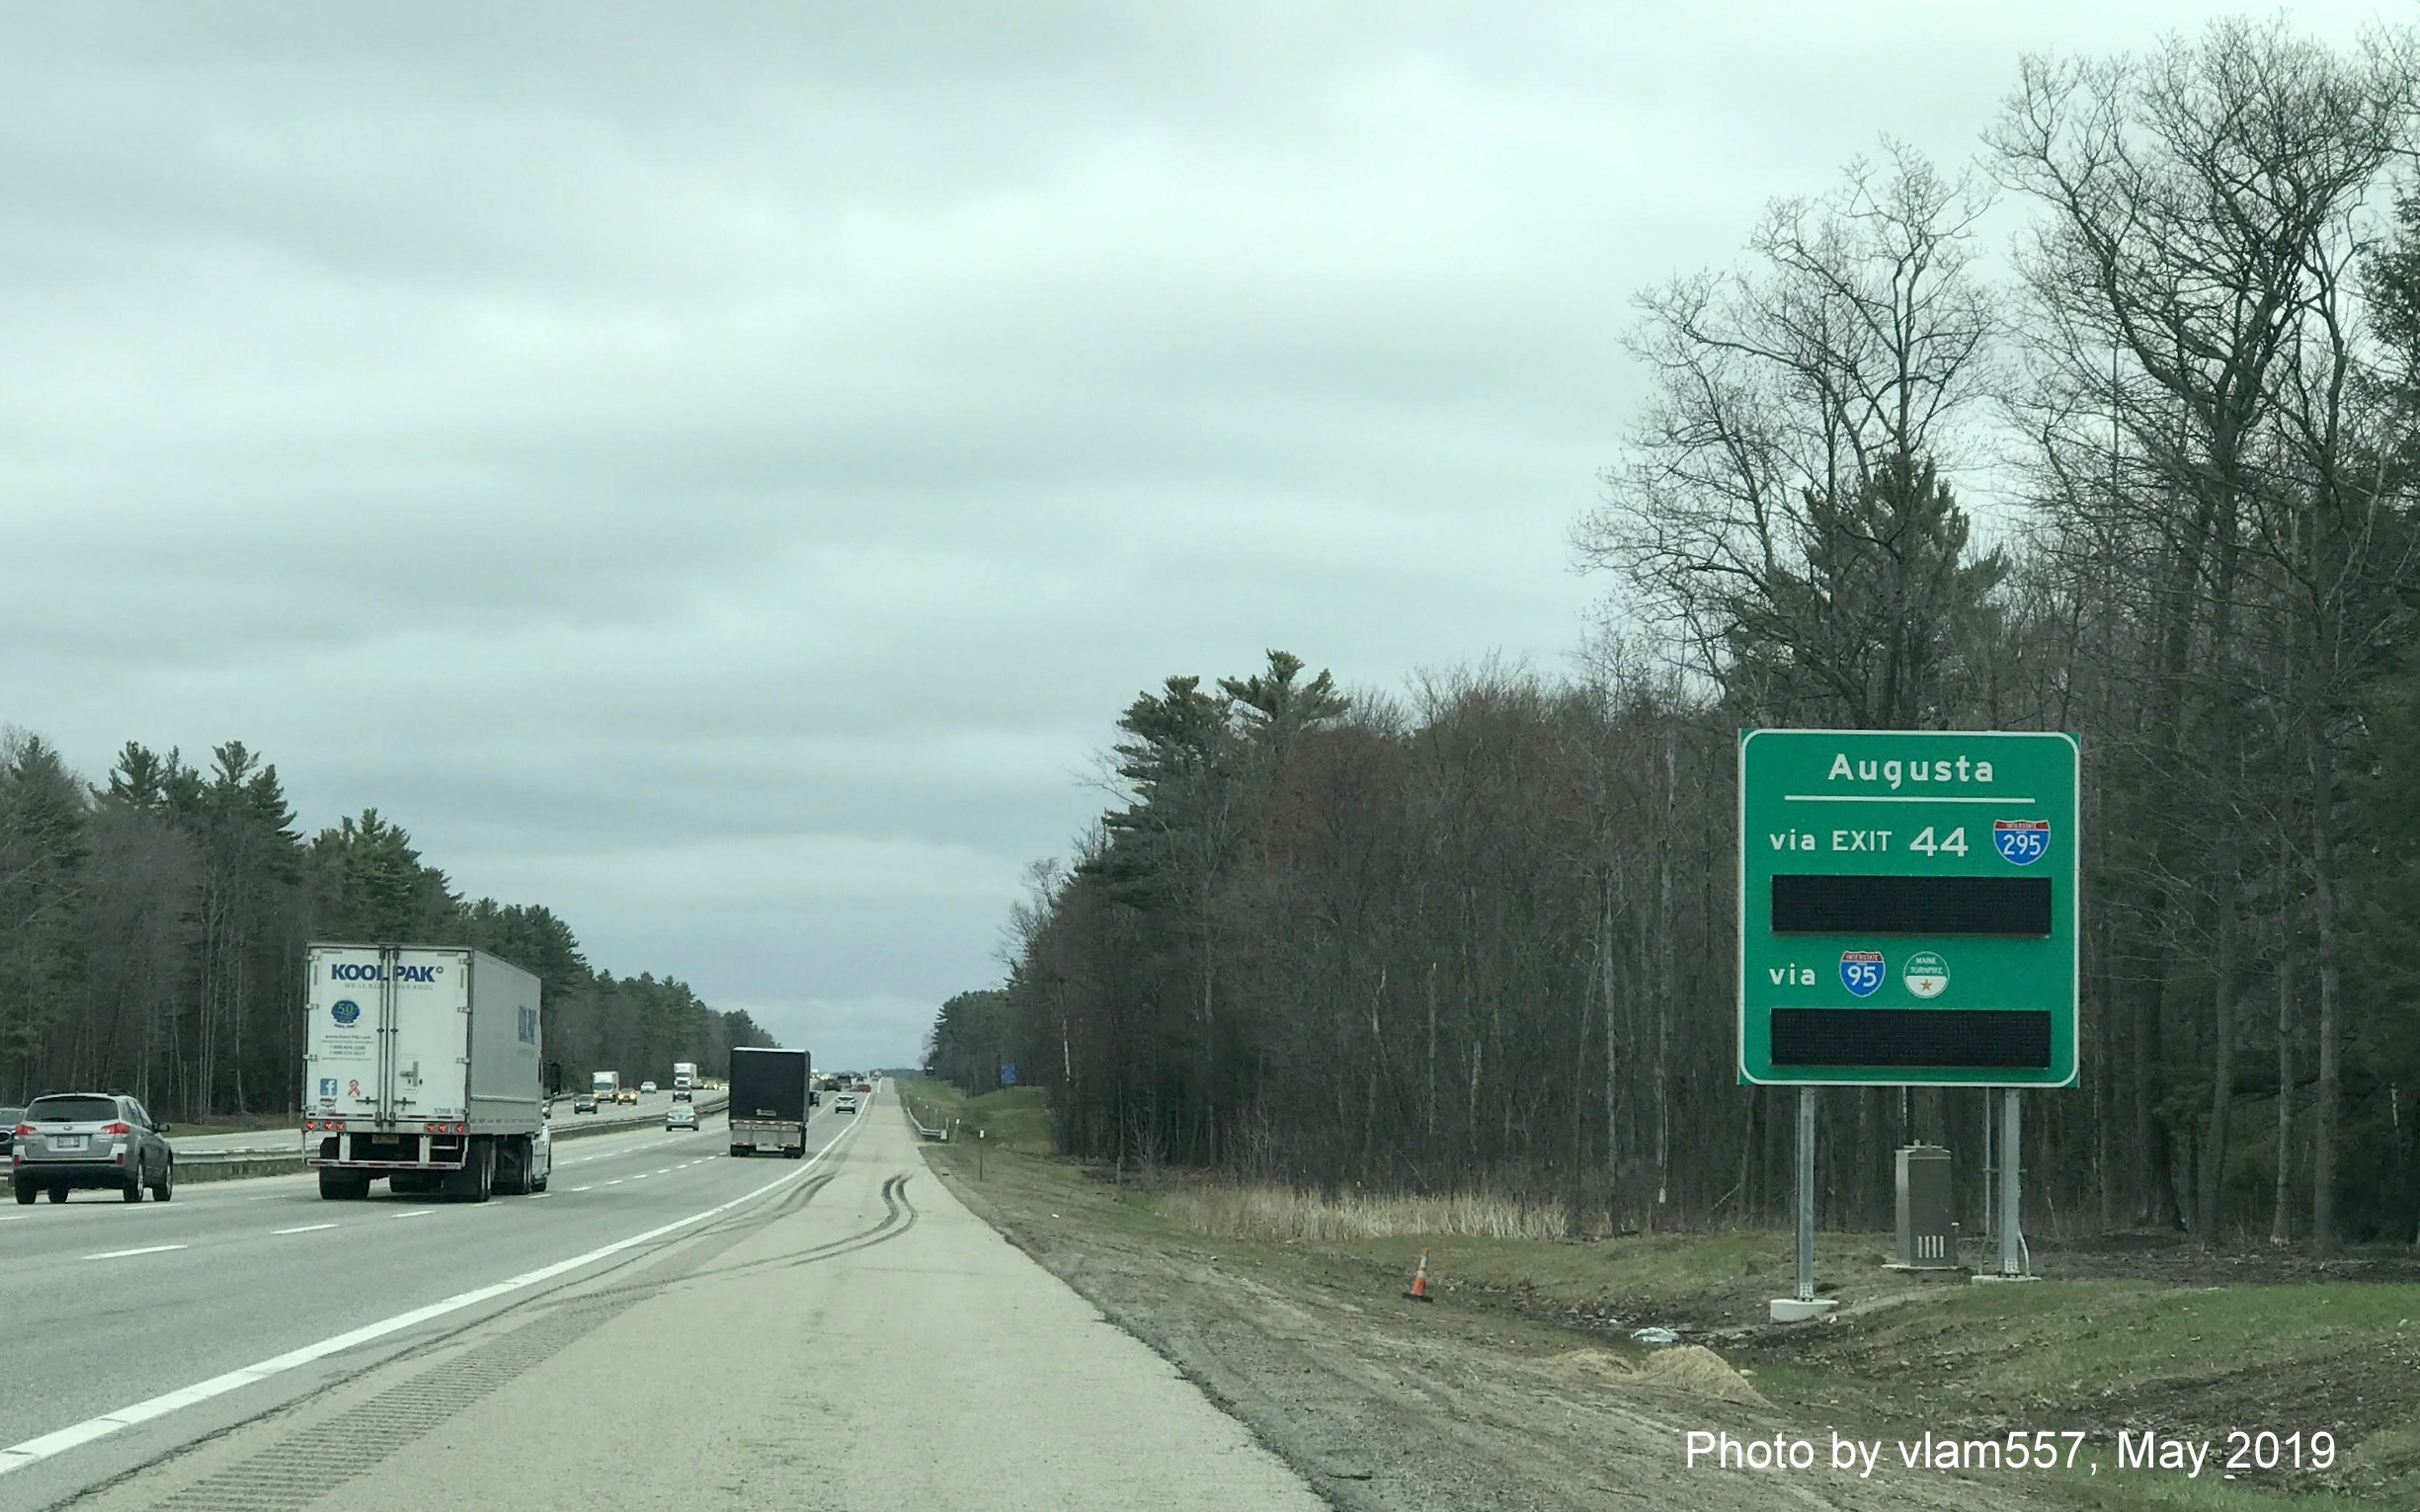 Image of newly installed travel time sign to Augusta on I-95 North/Maine Turnpike after I-195 Saco exit, by vlam557